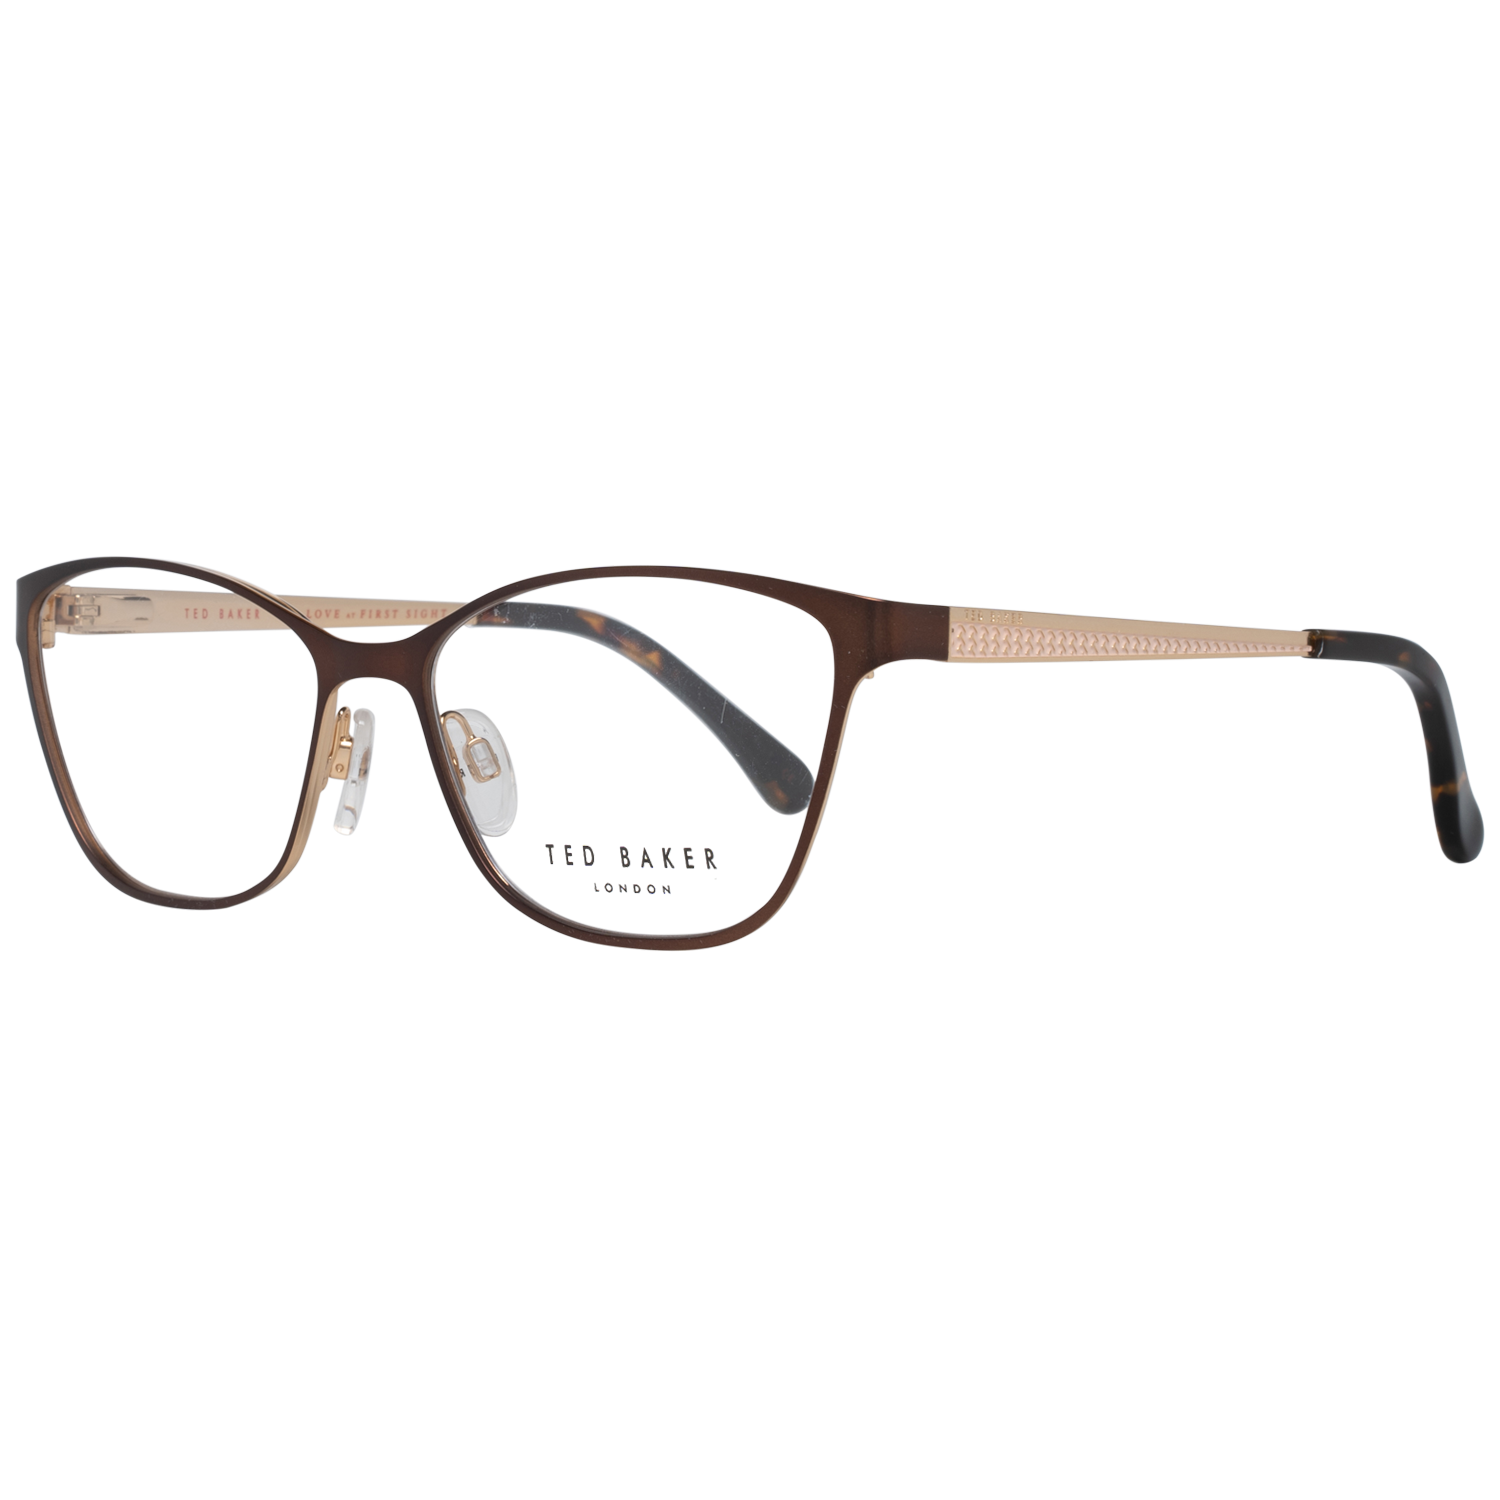 GenderWomenMain colorBrownFrame colorBrownFrame materialMetalSize53-15-135Lenses width53mmLenses heigth38mmBridge length15mmFrame width132mmTemple length135mmShipment includesCase, Cleaning clothStyleFull-RimSpring hingeYes